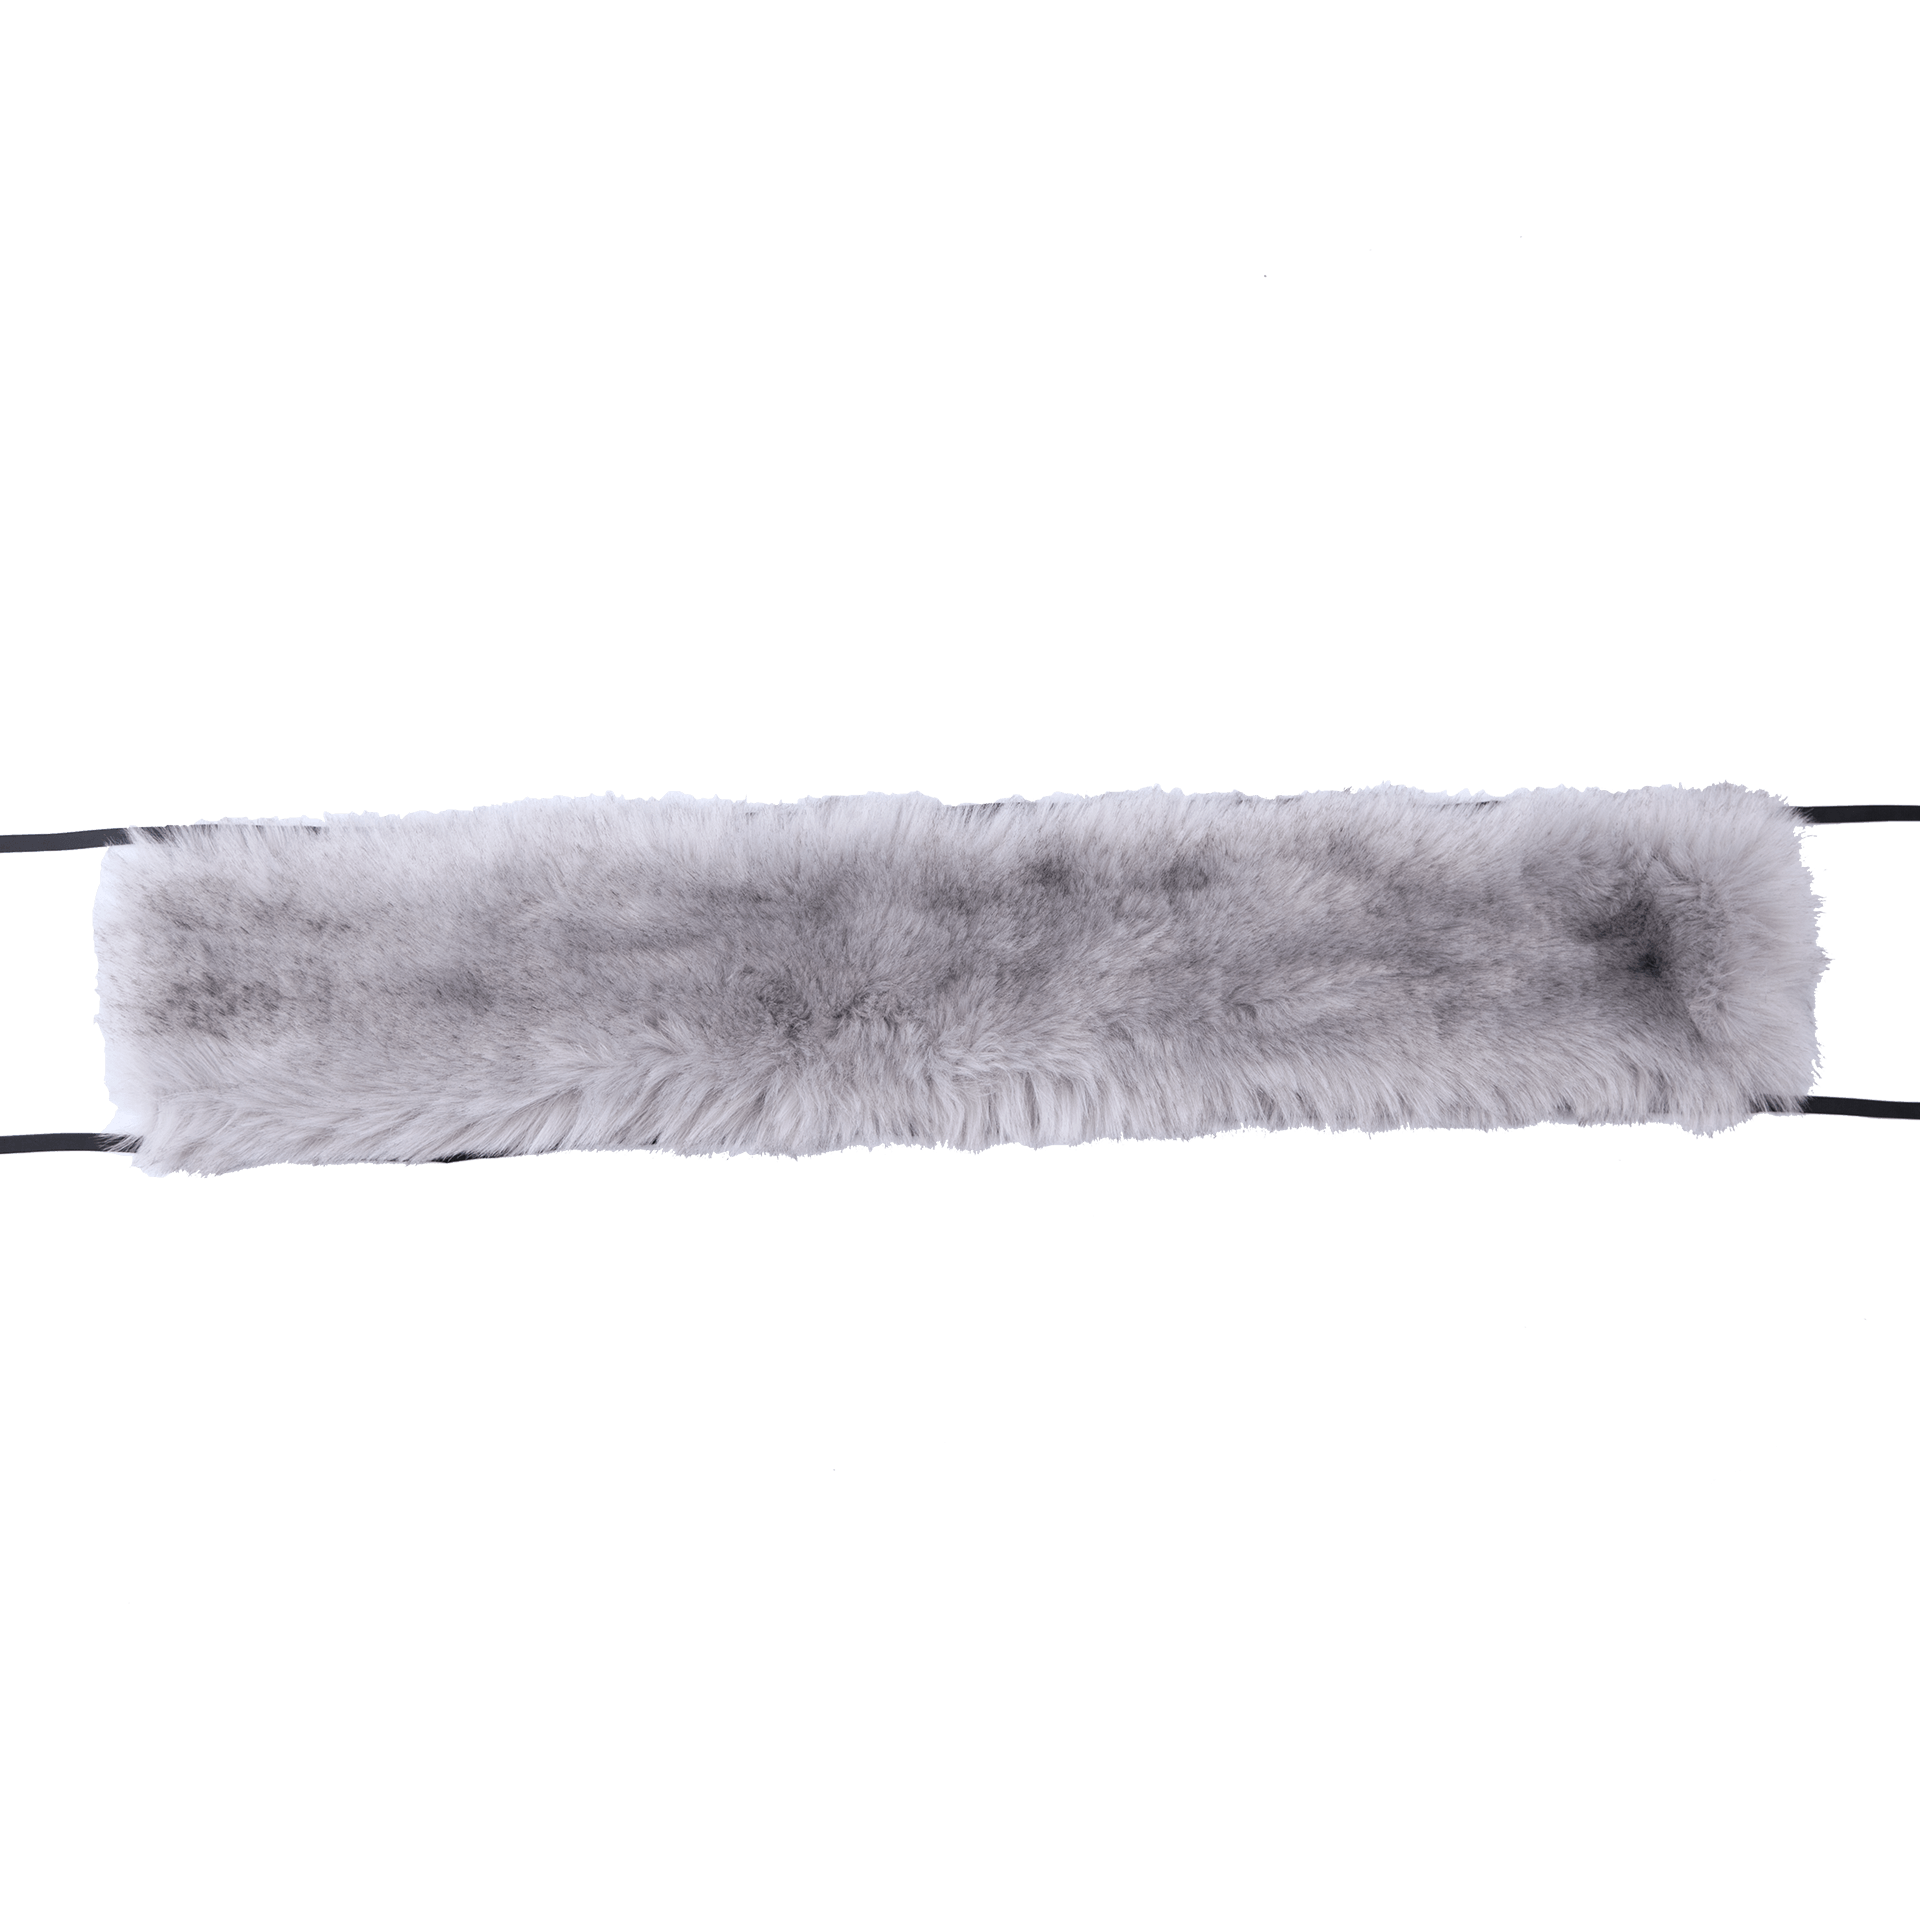 7 AM Enfant Fur Marquee Canopy Cover Tundra, Grey - ANB Baby -faux fur accent for stroller